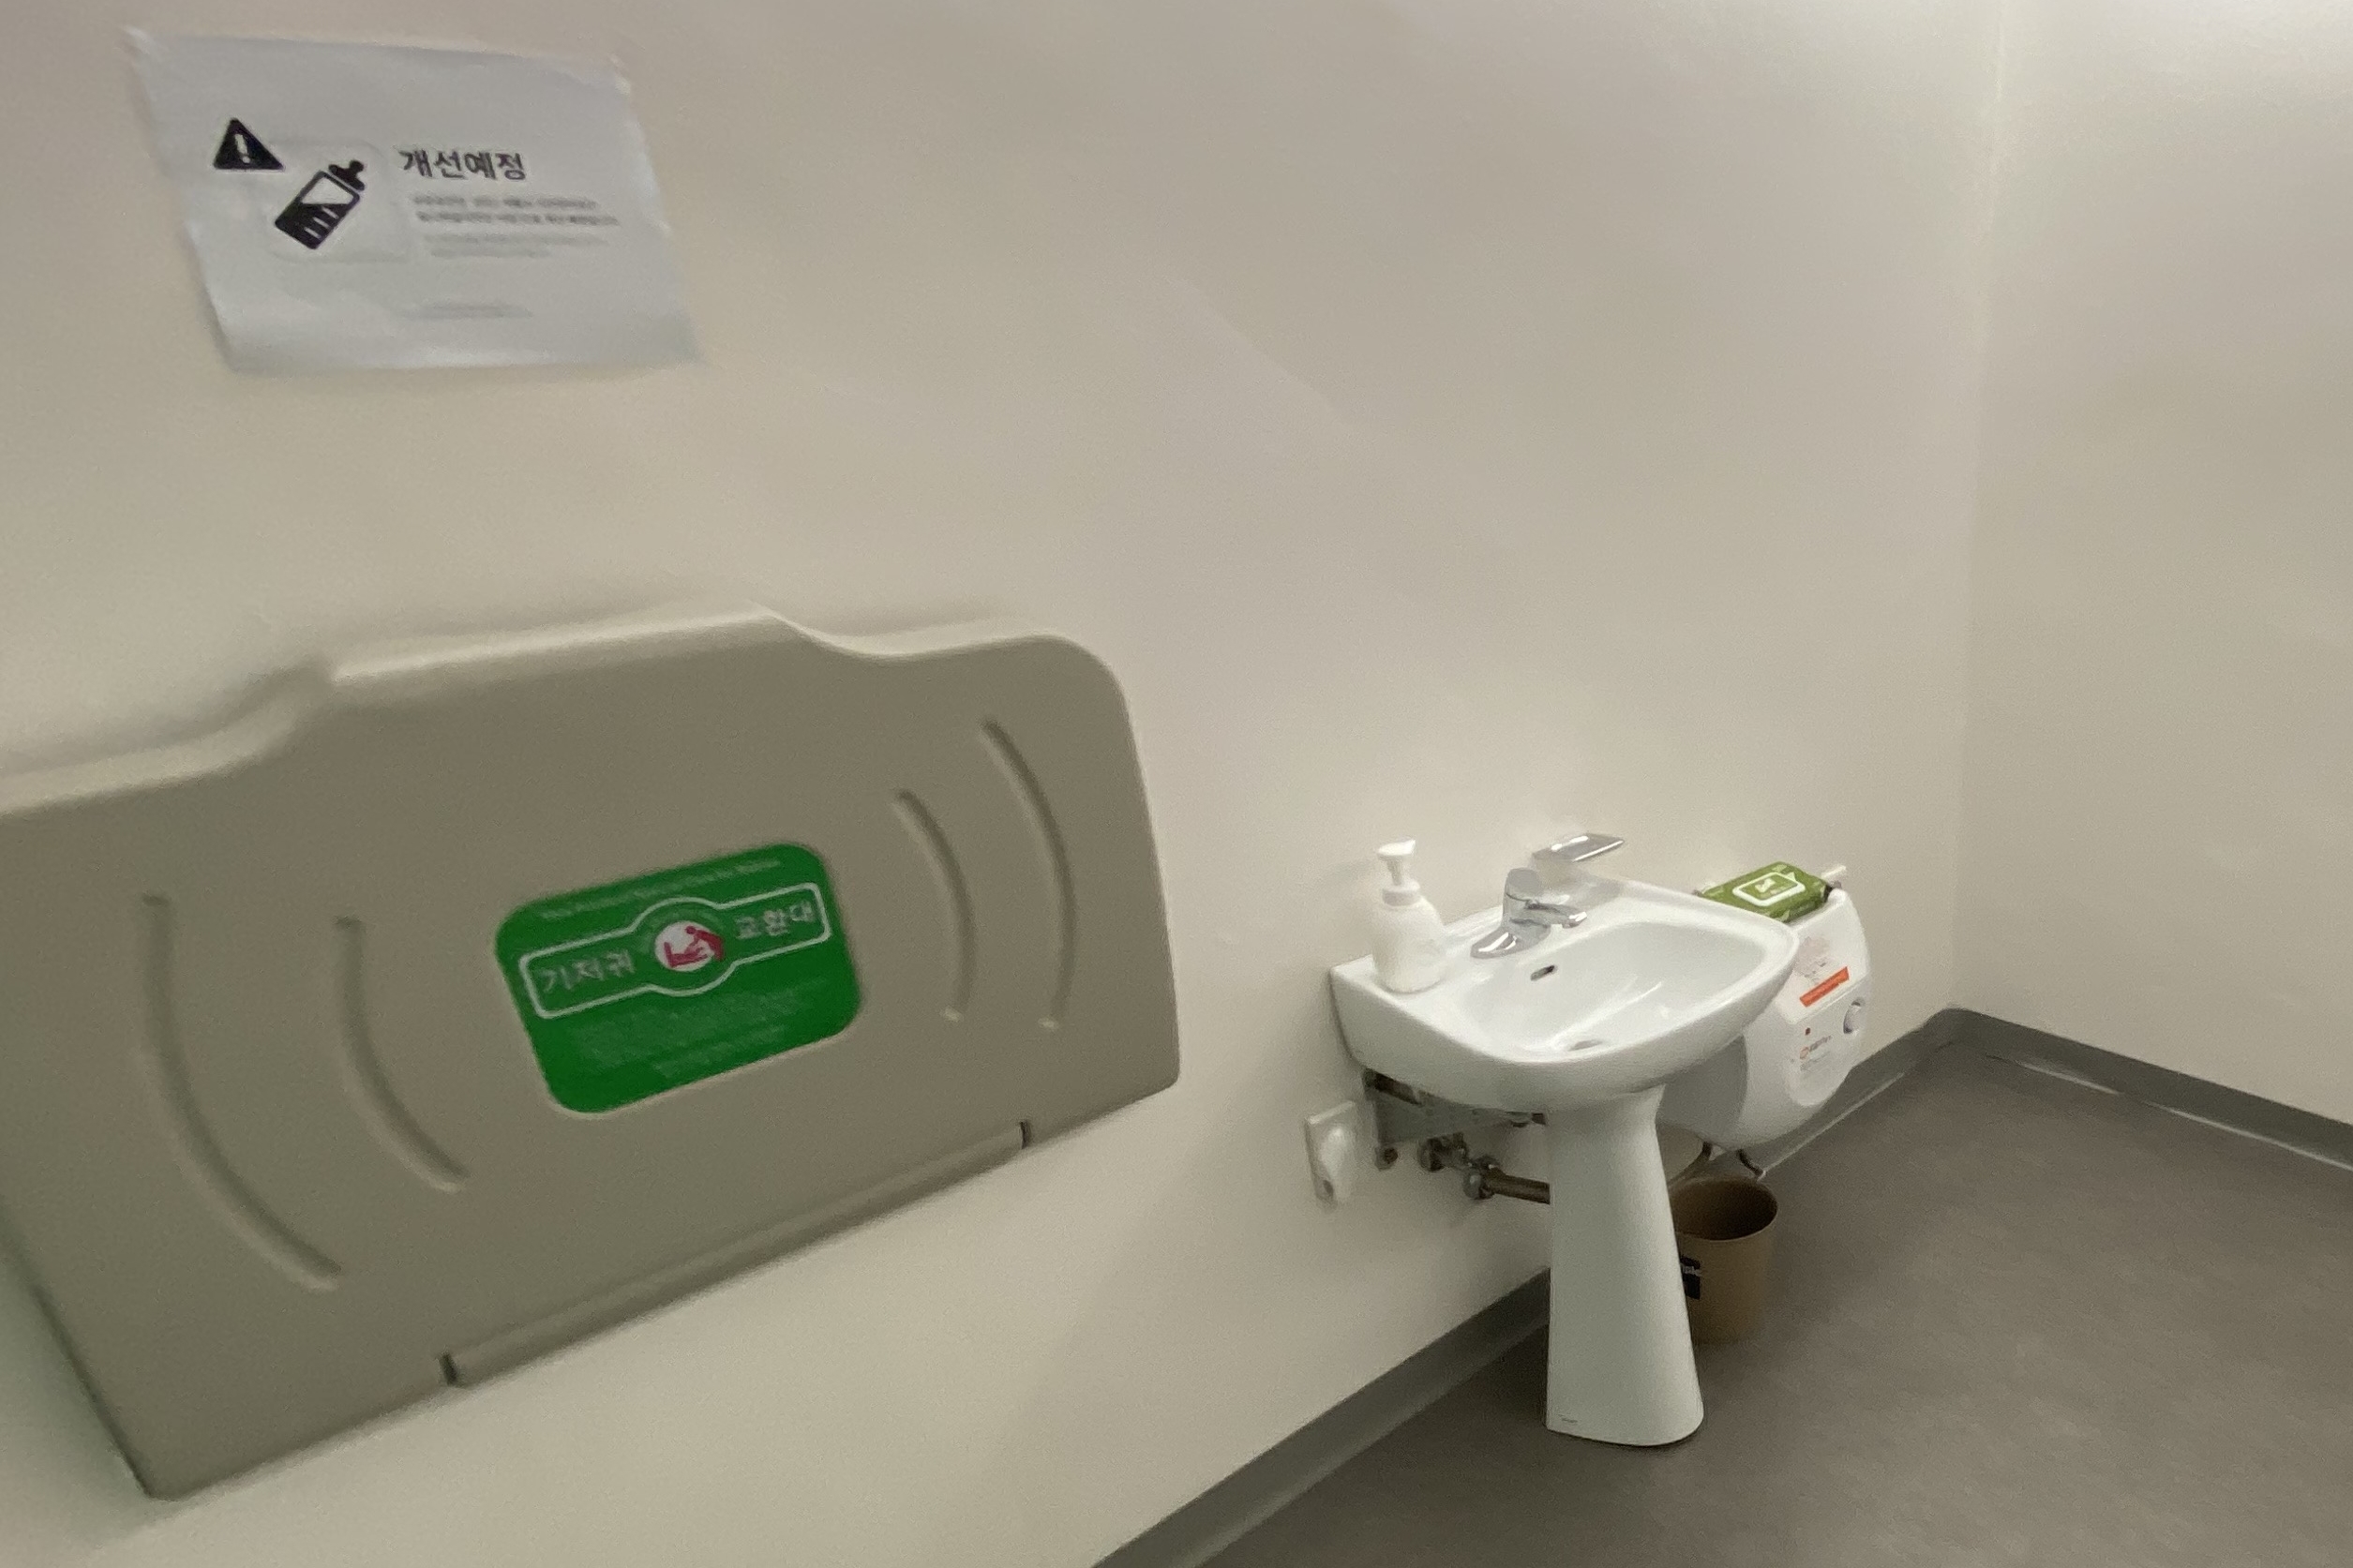 Parking facilities for persons with disabilities0 : Diaper changing station and a small sink
